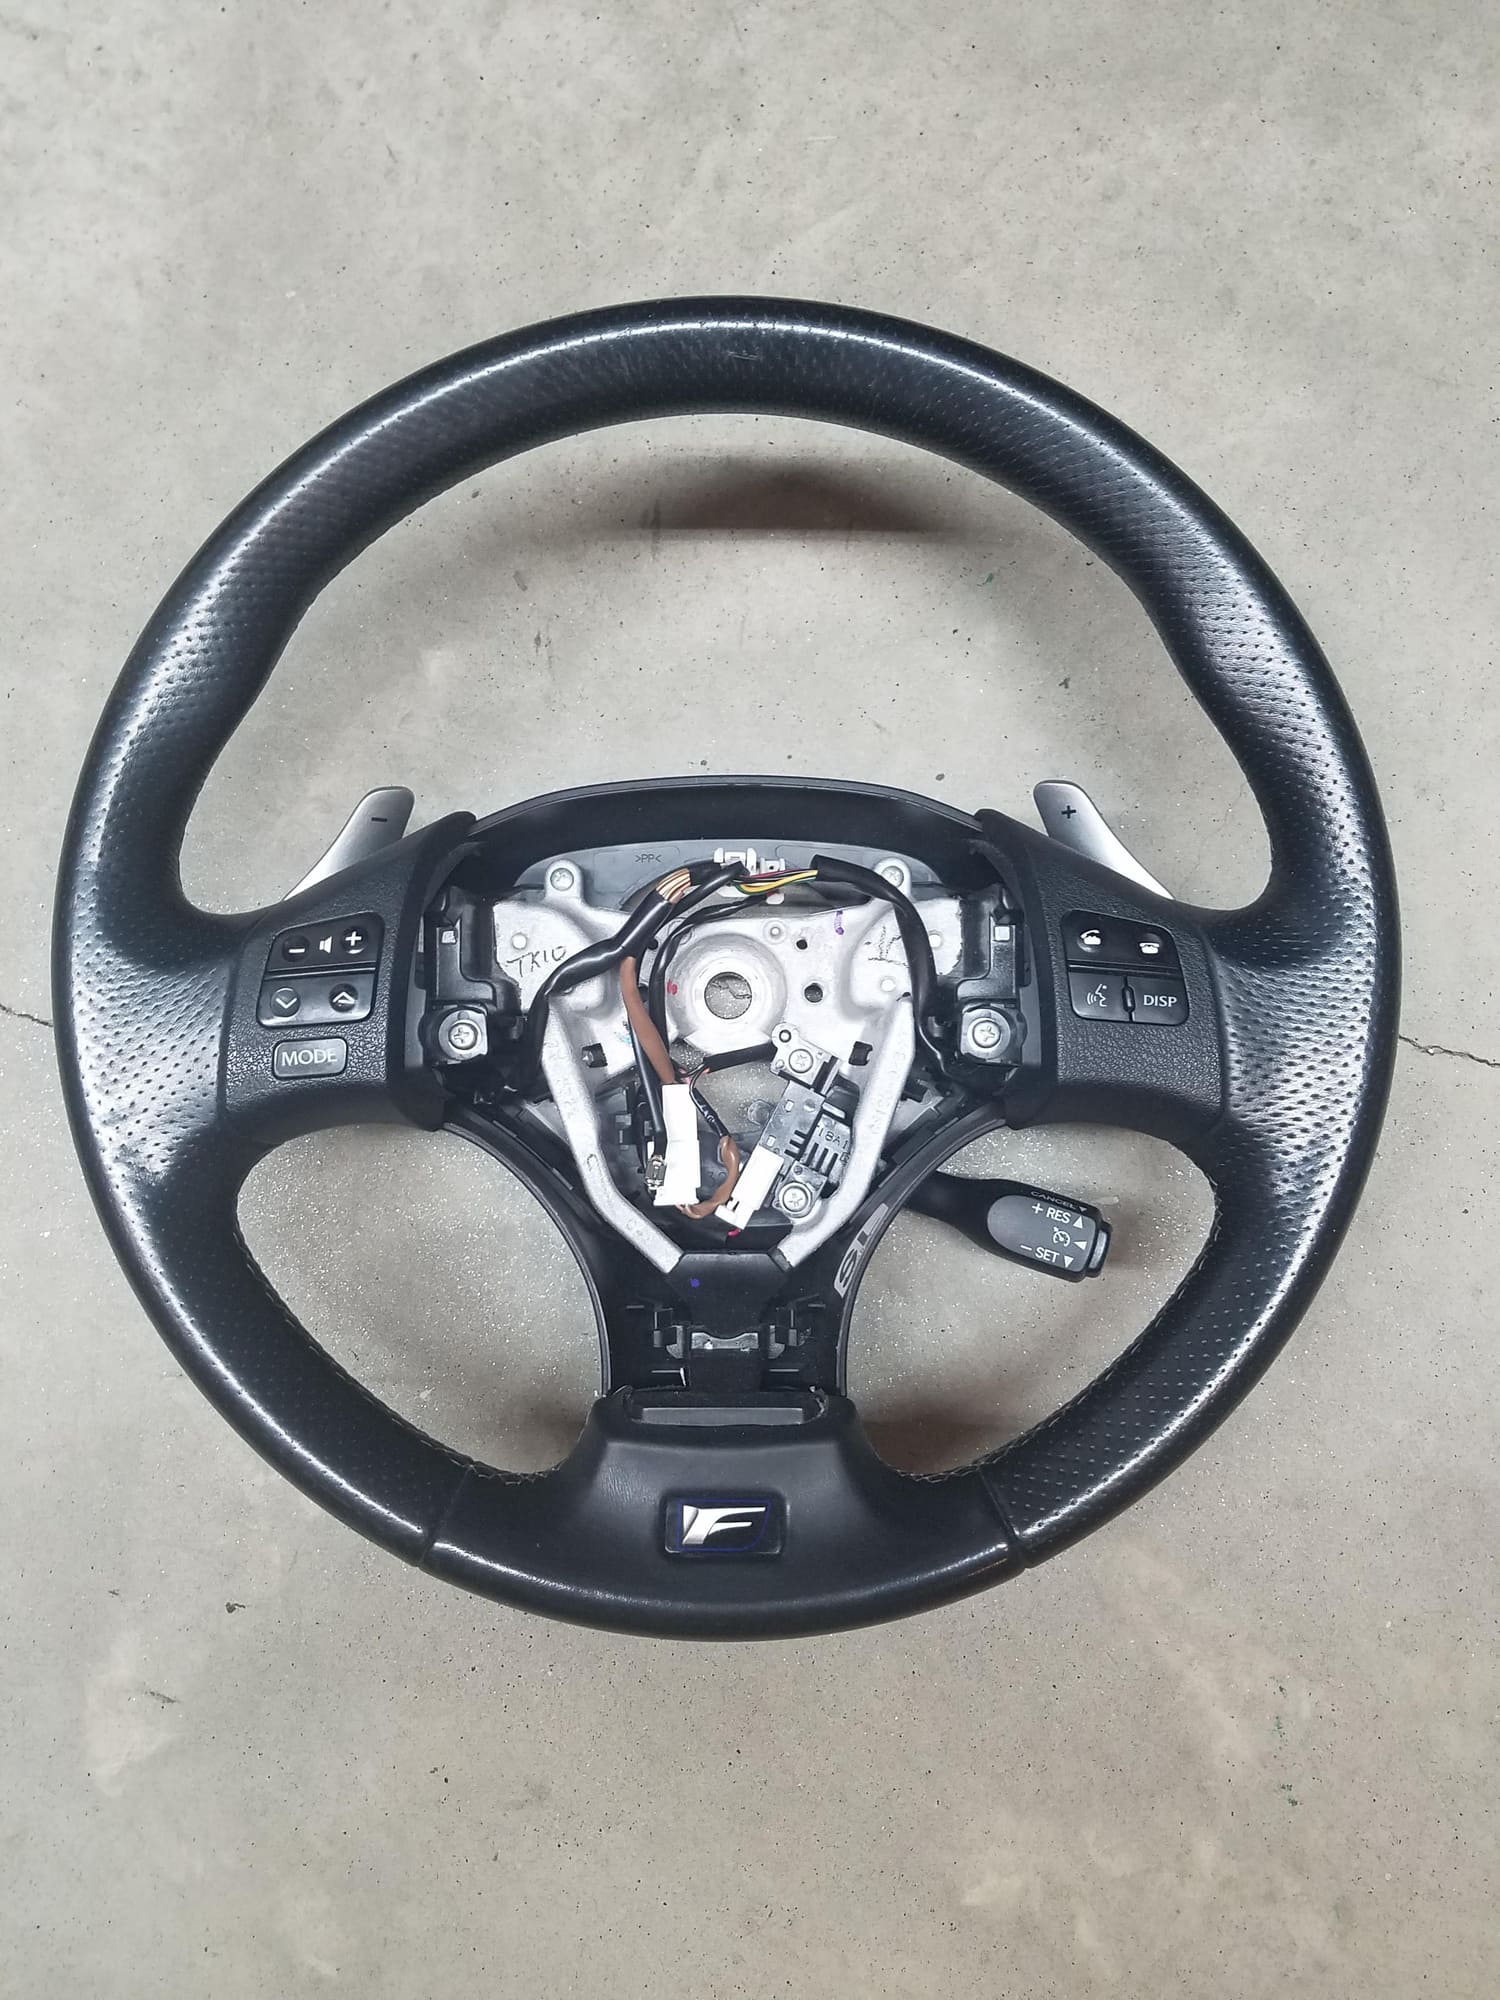 Interior/Upholstery - Canadian-spec F-sport badged perforated leather steering wheel - Used - 2006 to 2013 Lexus IS250 - 2006 to 2013 Lexus IS350 - Greer, SC 29651, United States